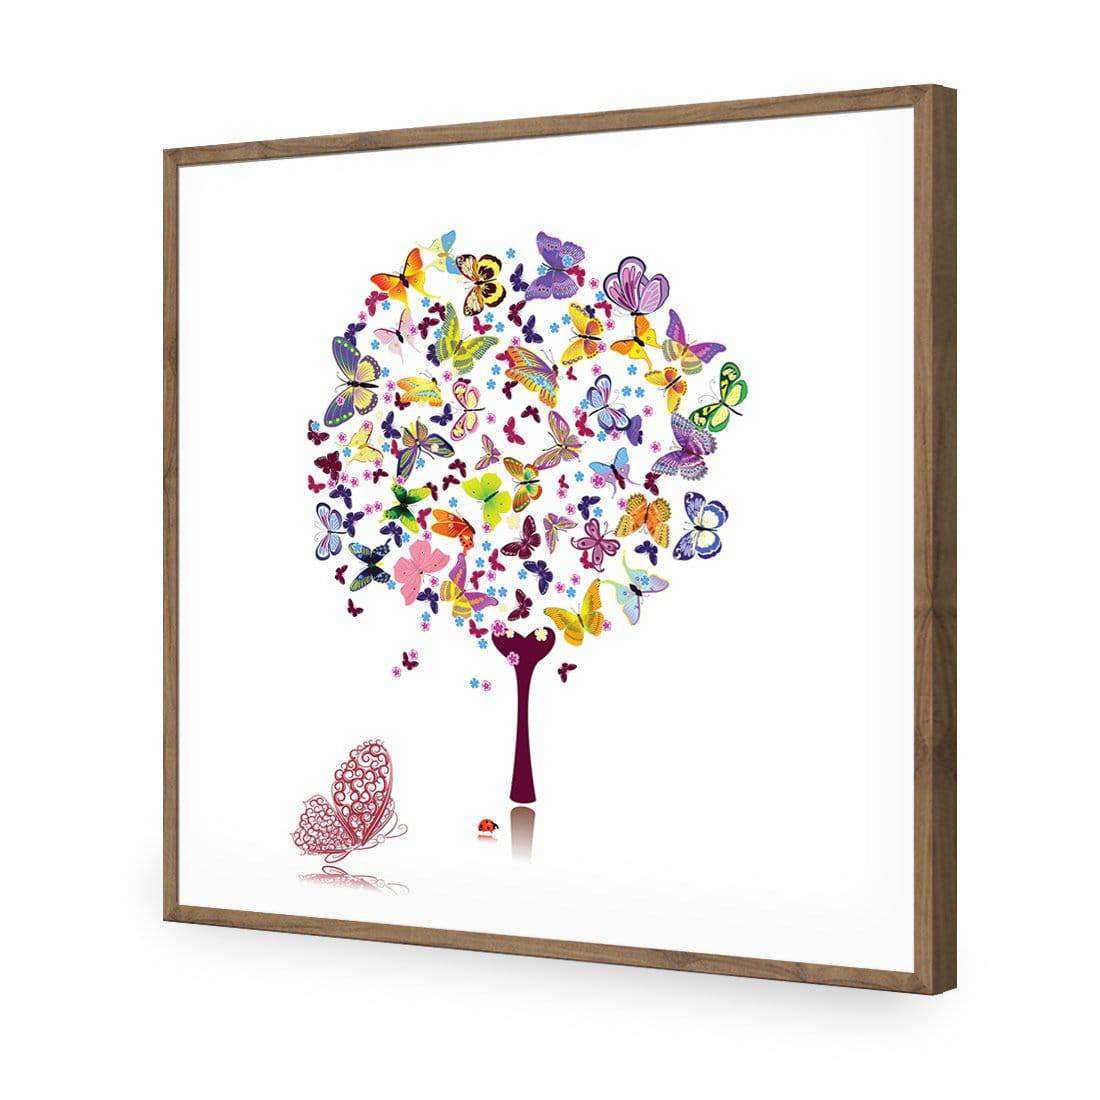 Day Dream Tree, Square-Acrylic-Wall Art Design-Without Border-Acrylic - Natural Frame-37x37cm-Wall Art Designs